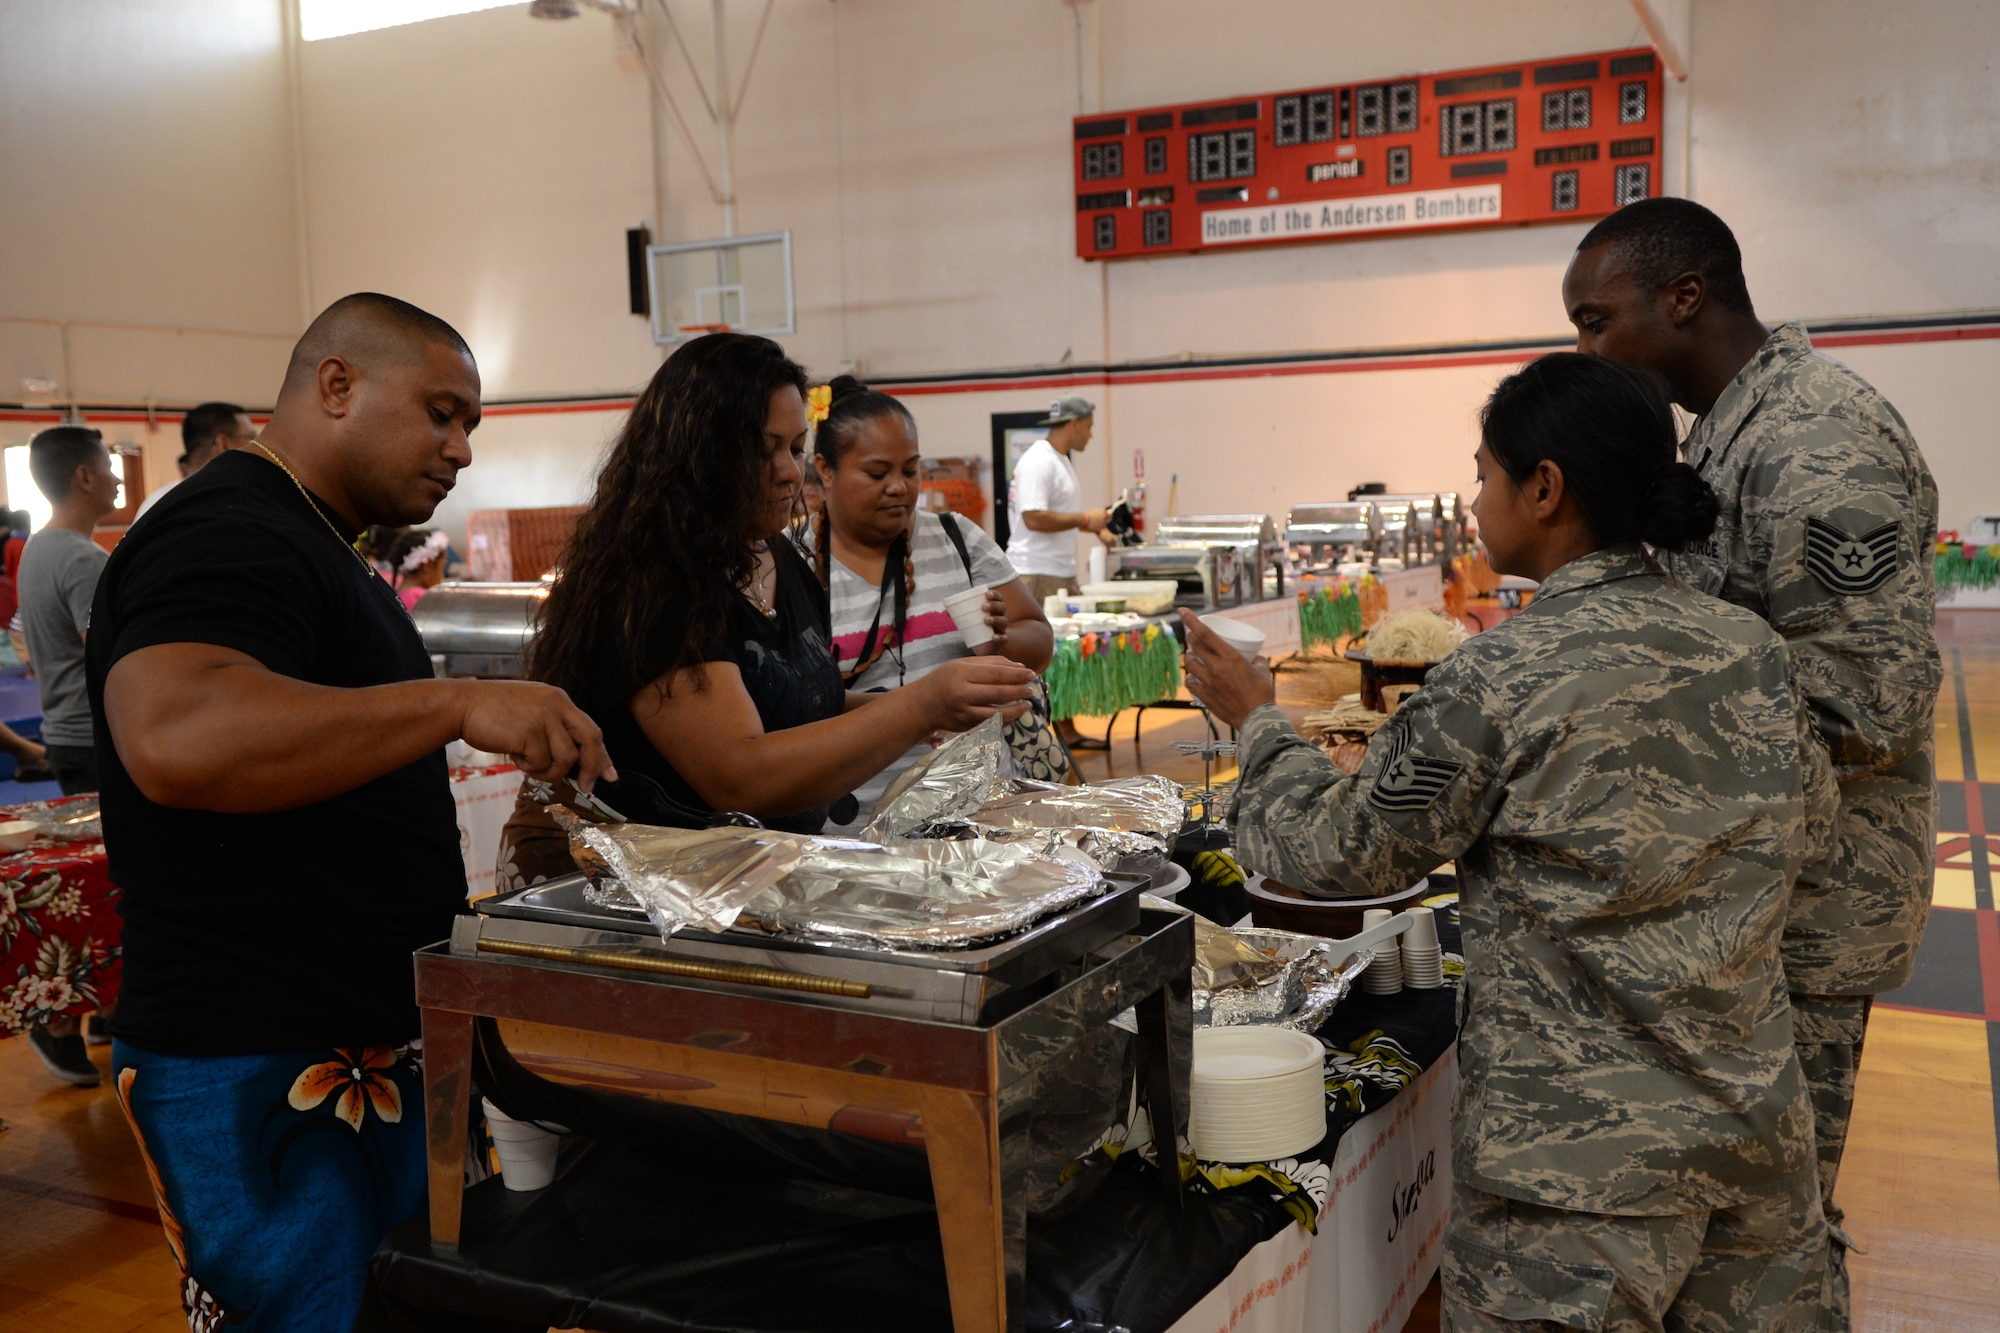 Volunteers serve food to guests during a festival recognizing Asian-Pacific American Heritage Month May 22, 2014, at Andersen Air Force Base, Guam. The festival had displays from different cultures that included food tasting, a raffle and a cultural performance. (U.S. Air Force photo by Airman 1st Class Amanda Morris/Released)